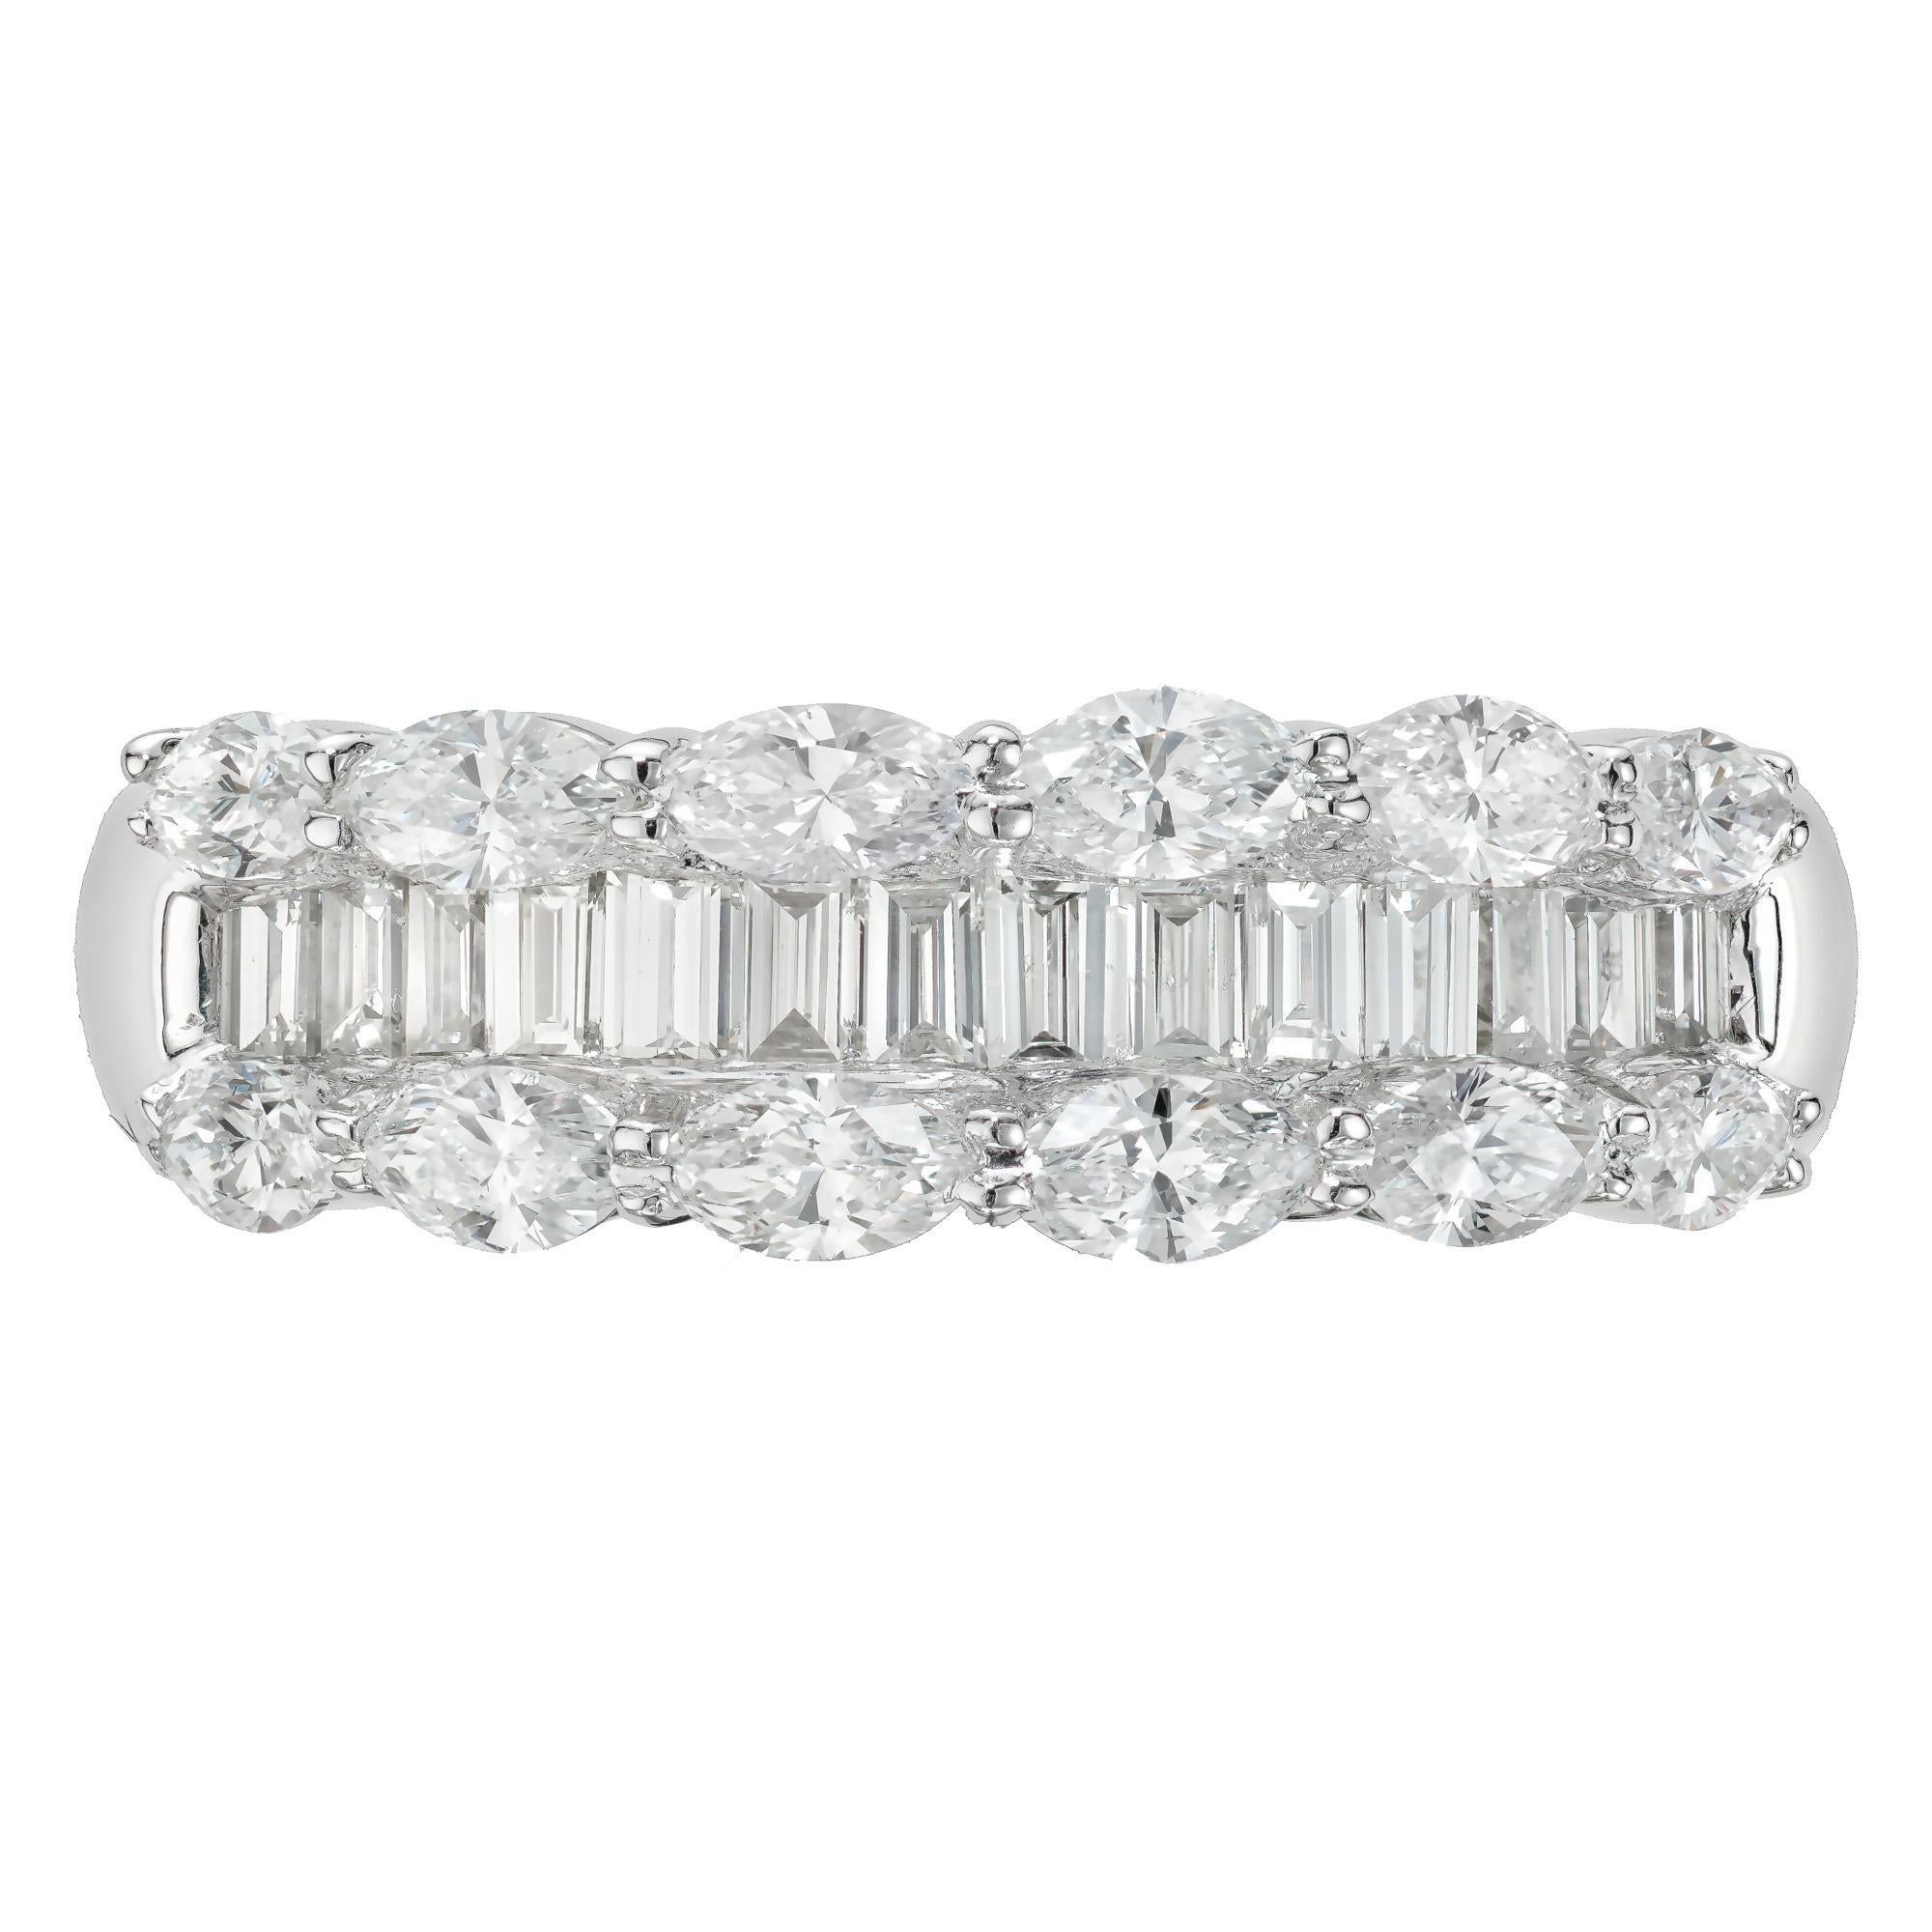 Three-row diamond platinum wedding band ring. 14 step cut baguette diamonds with a row of 6 marquise cut diamonds on each side in a platinum setting.

12 marquise diamonds, H VS-SI approx. .65cts
14 step cut baguette diamonds, H VS approx.